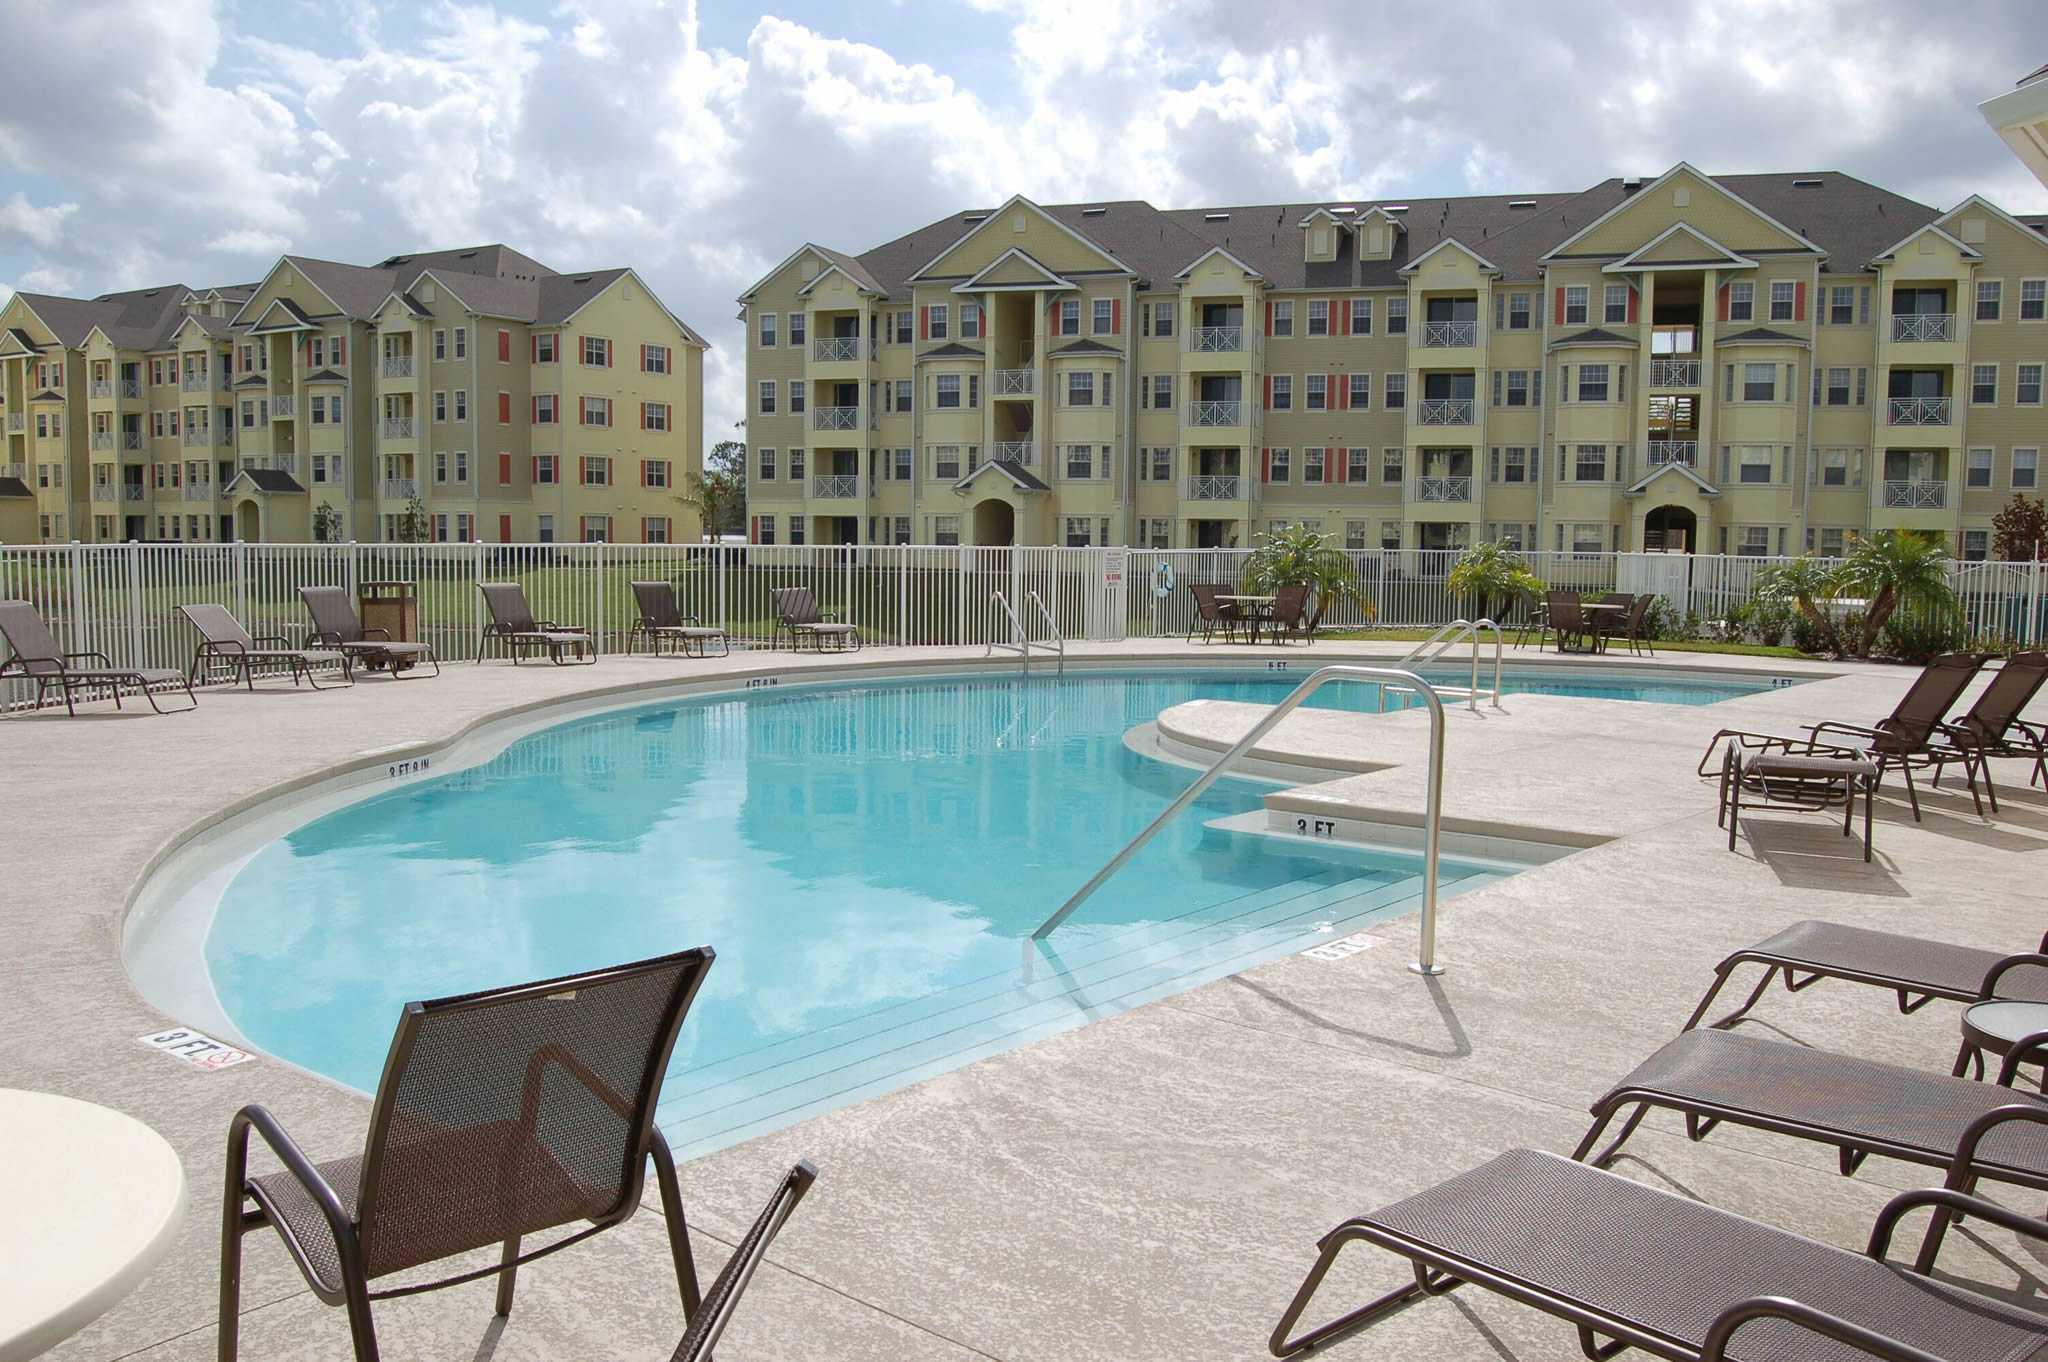 Property Management Orlando on Luxurious 4 Bedroom Condo 5 Minutes From Walt Disney World Main Gate